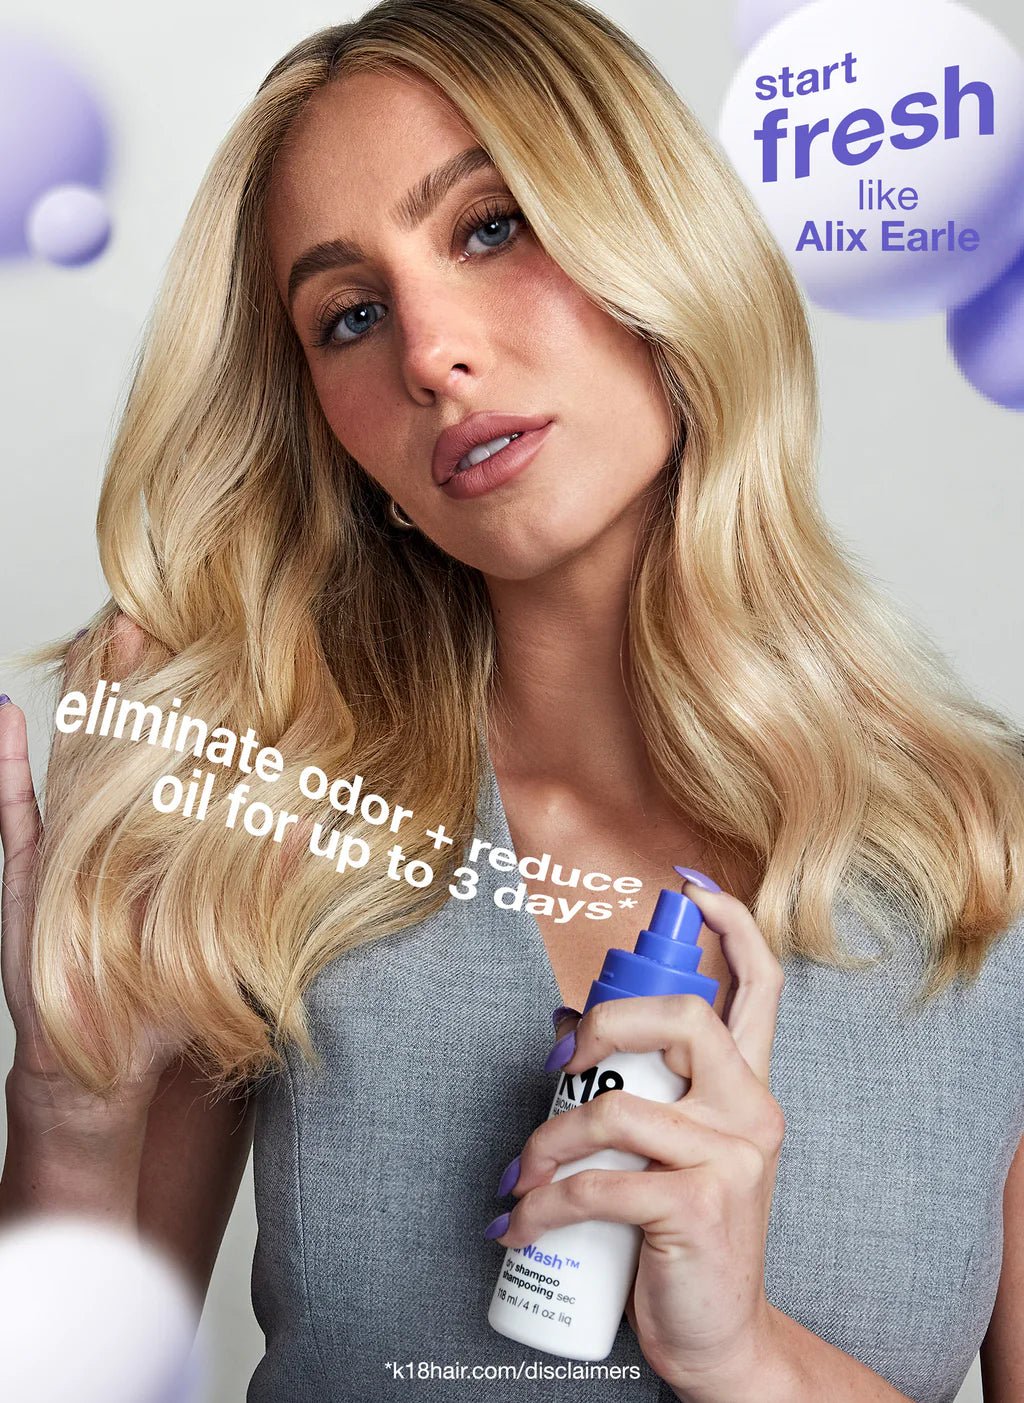 A person with long blonde hair holds a spray bottle of K18 AirWash Dry Shampoo by Simply Colour Hair Salon Studio & Online Store while looking at the camera. Text on image reads, "eliminate odor + reduce oil for up to 3 days*.